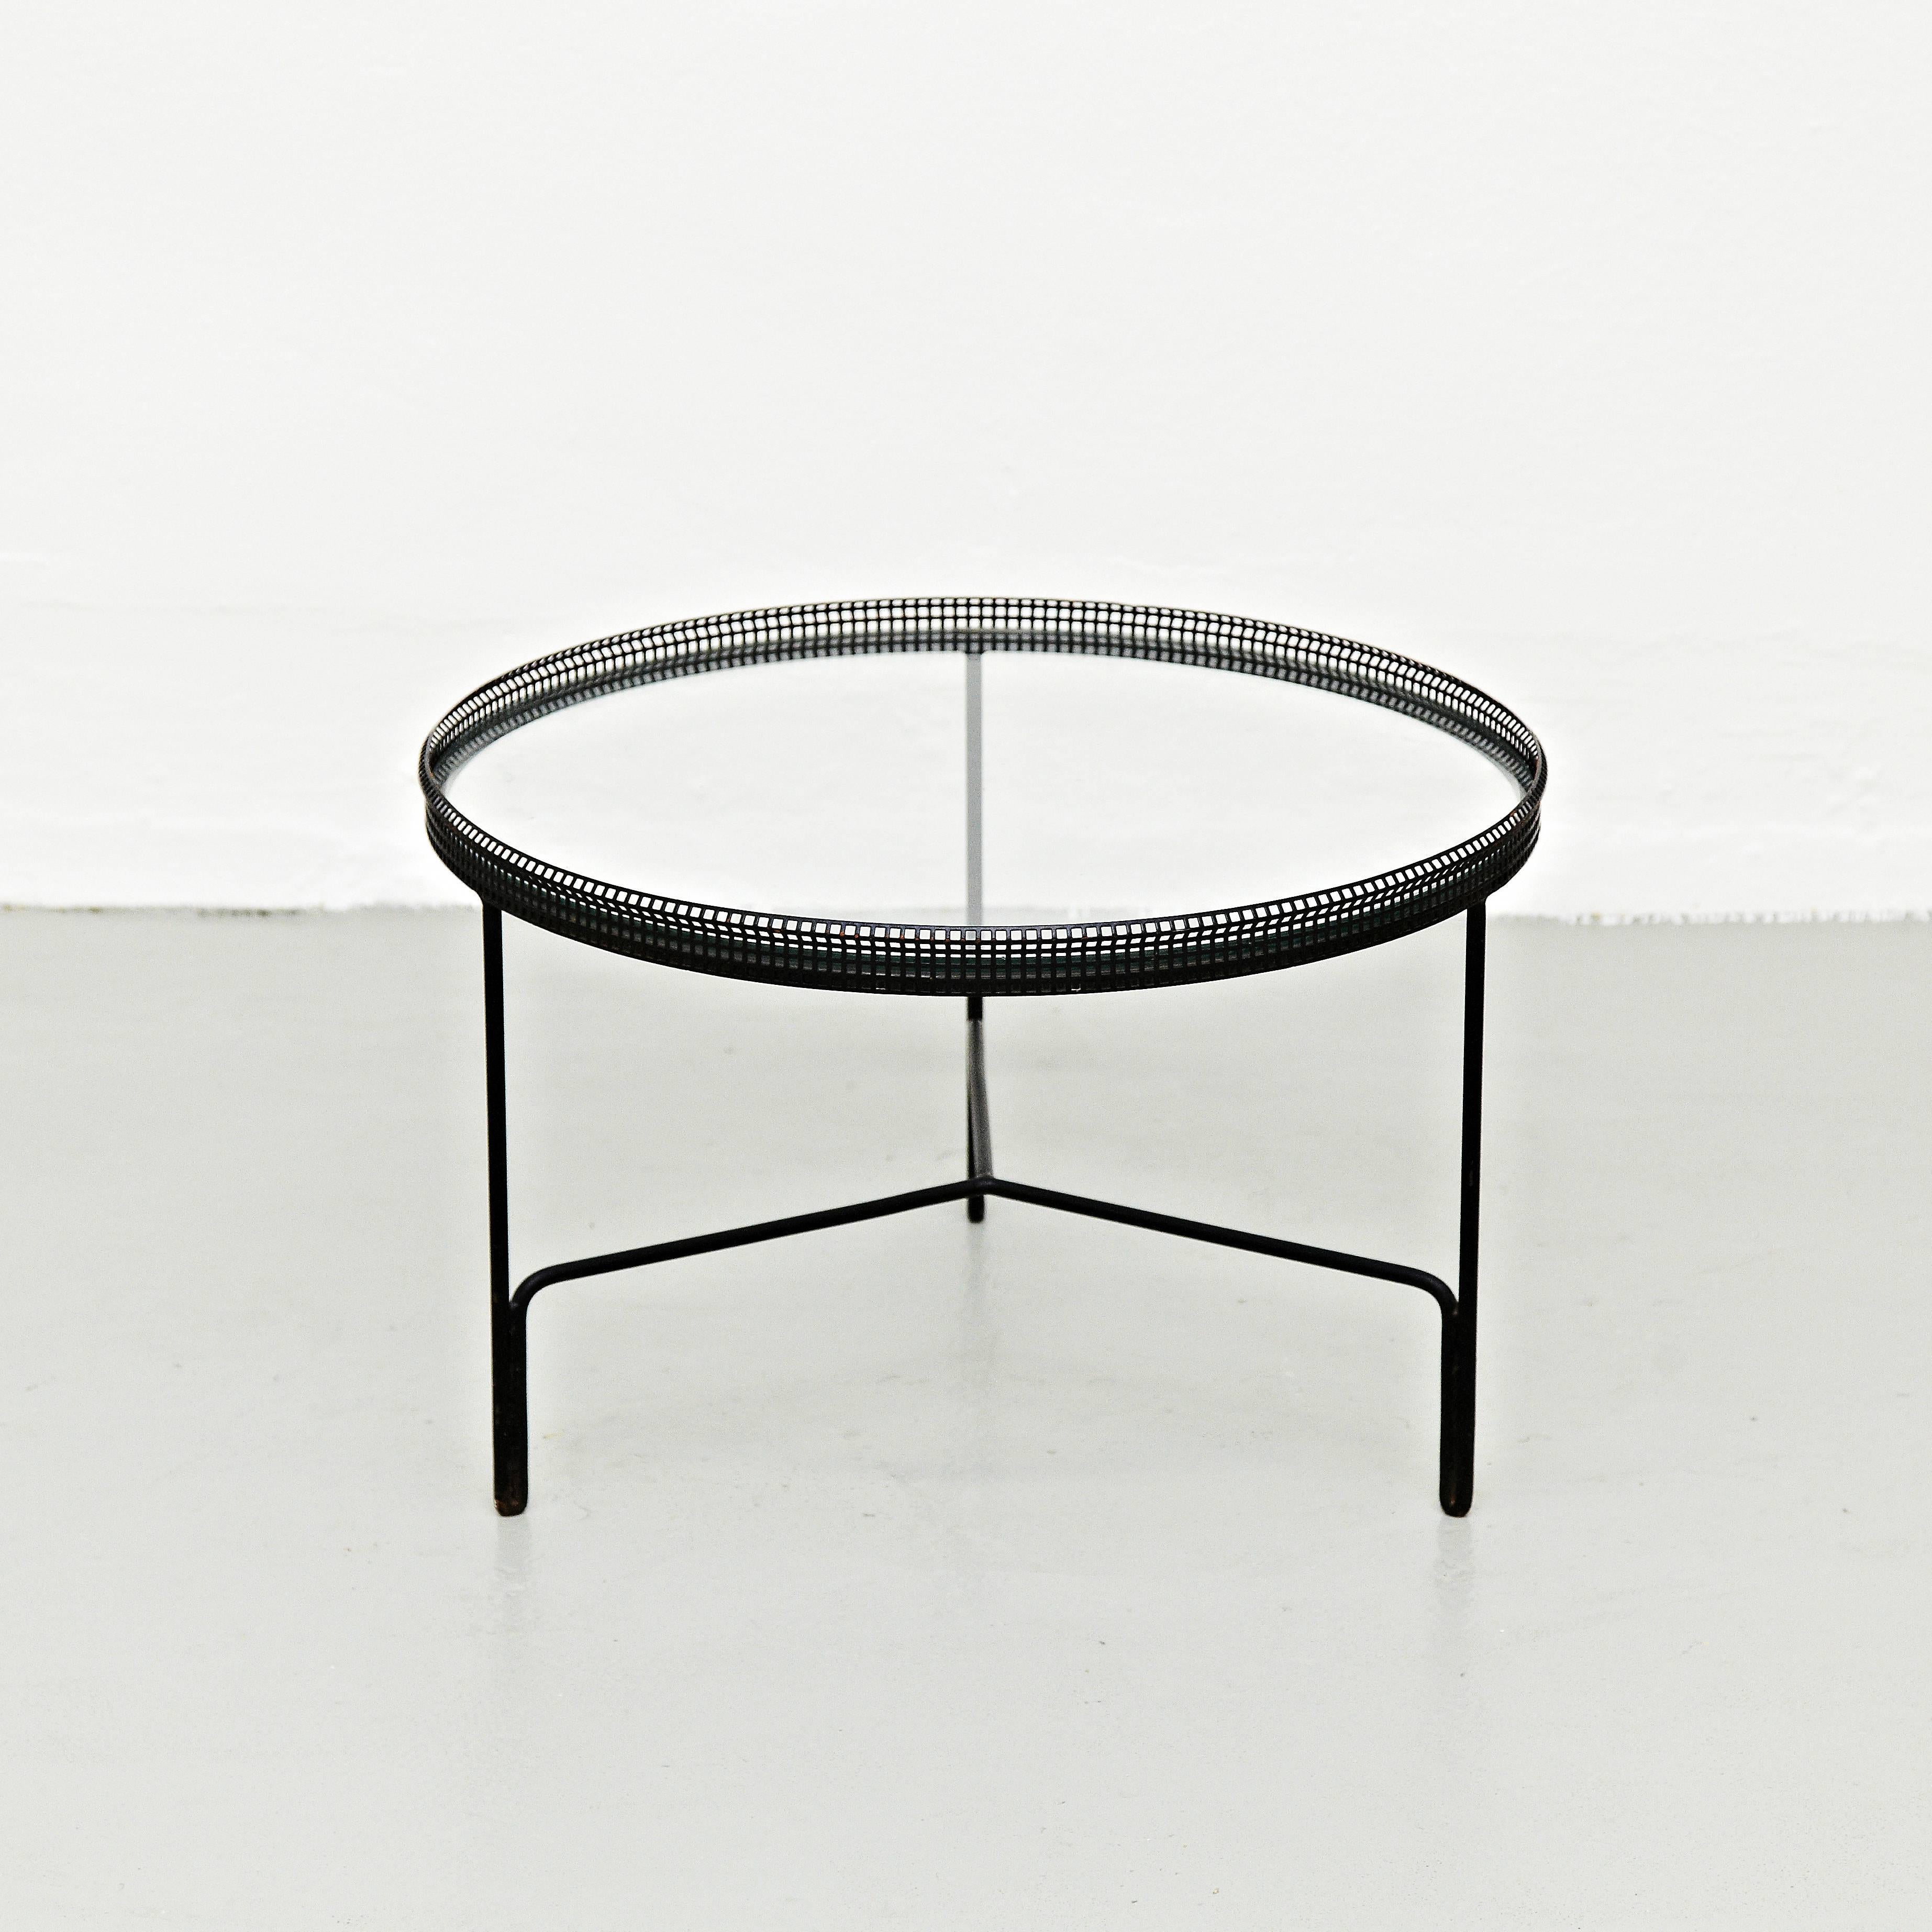 Coffee table designed by Mathieu Matégot.
Manufactured by Ateliers Matégot (France), circa 1950.
Lacquered perforated metal with original paint.

In good original condition, with minor wear consistent with age and use, preserving a beautiful